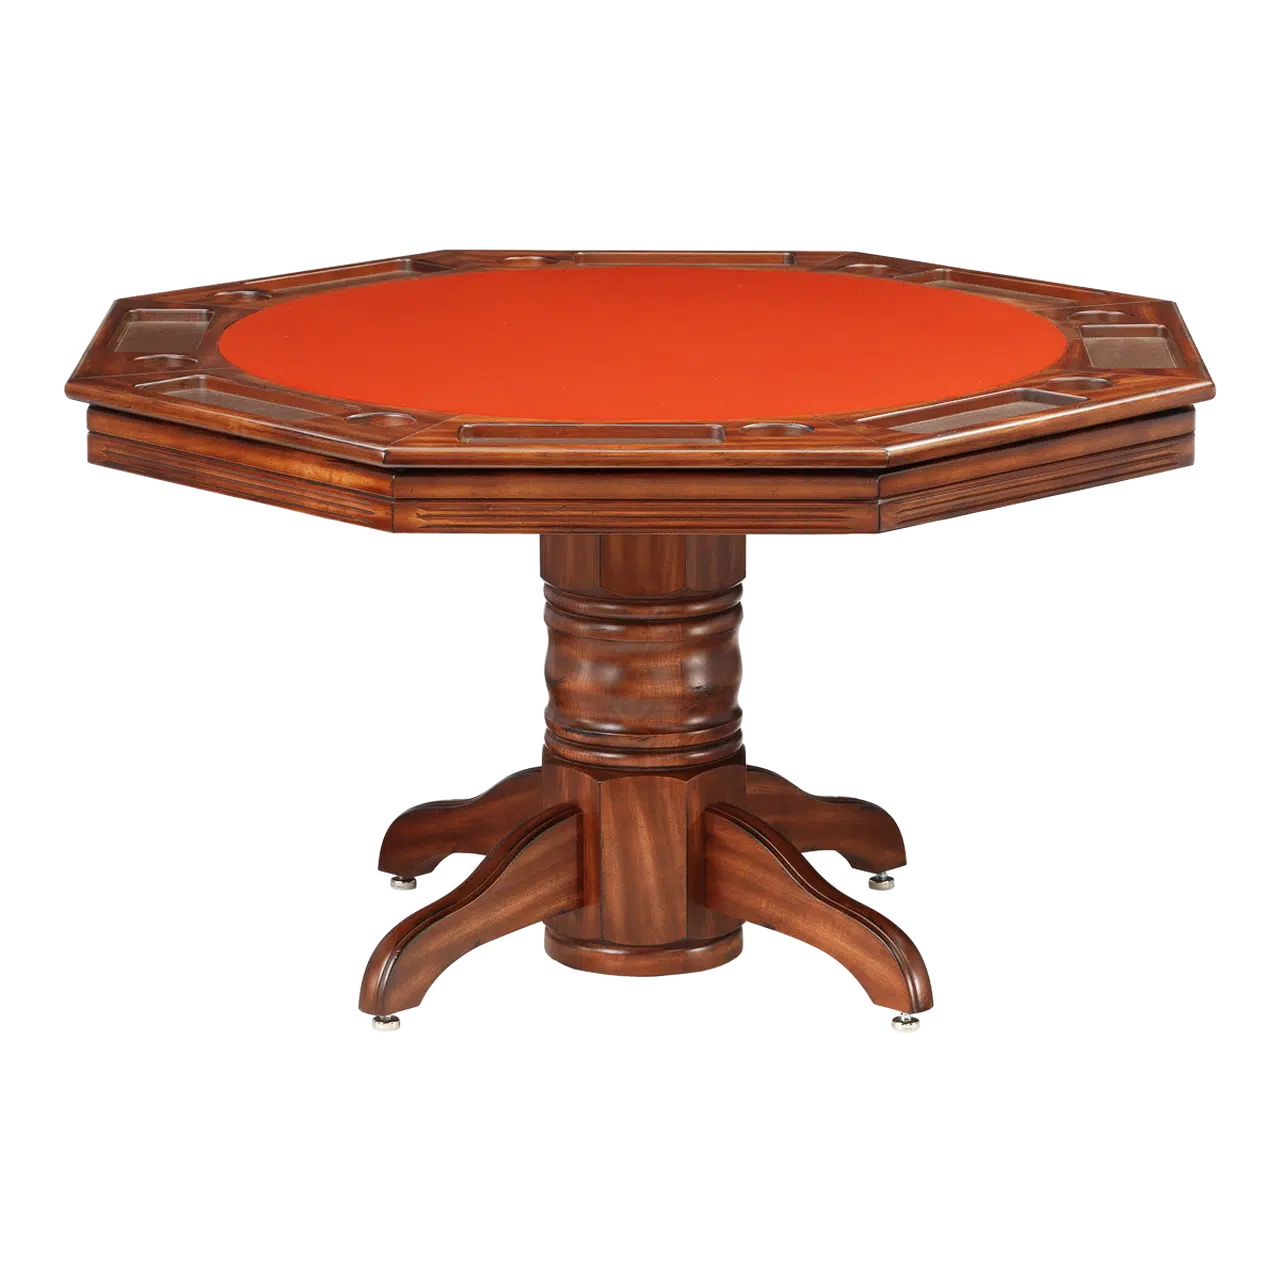 Poker & Dining Table Riviera by Darafeev-AMERICANA-POKER-TABLES